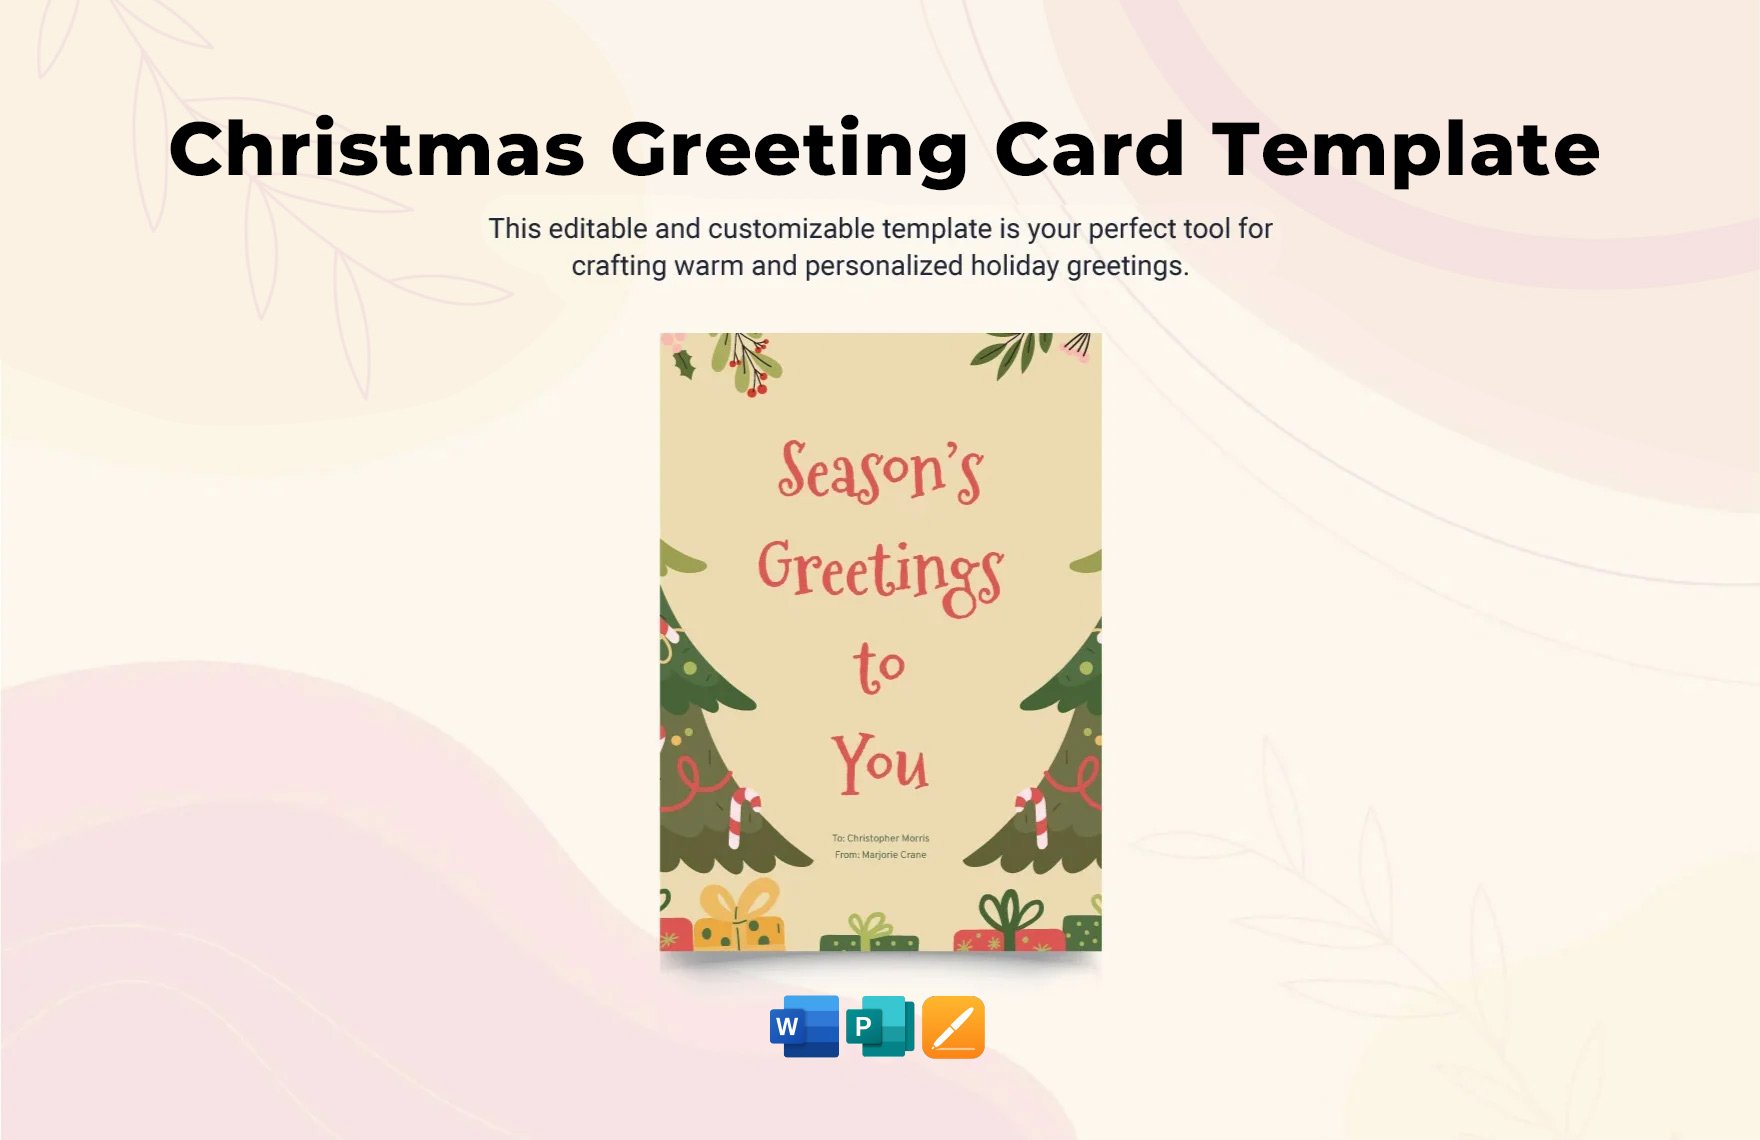 Christmas Greeting Card Template in Word, Apple Pages, Publisher